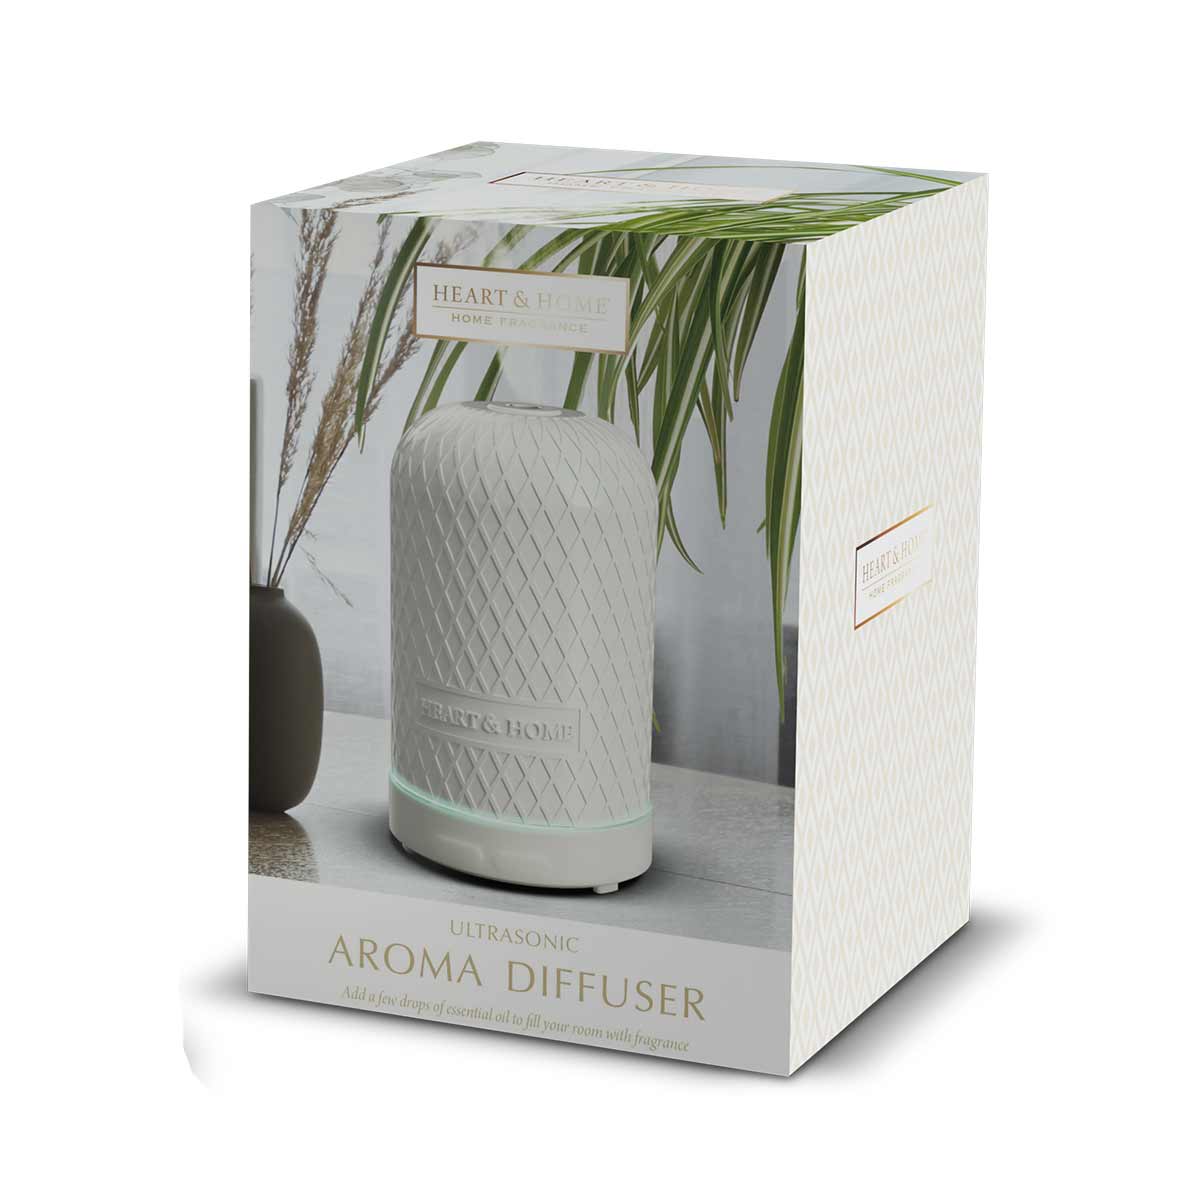 Heart and Home Ultrasonic Aroma Diffuser